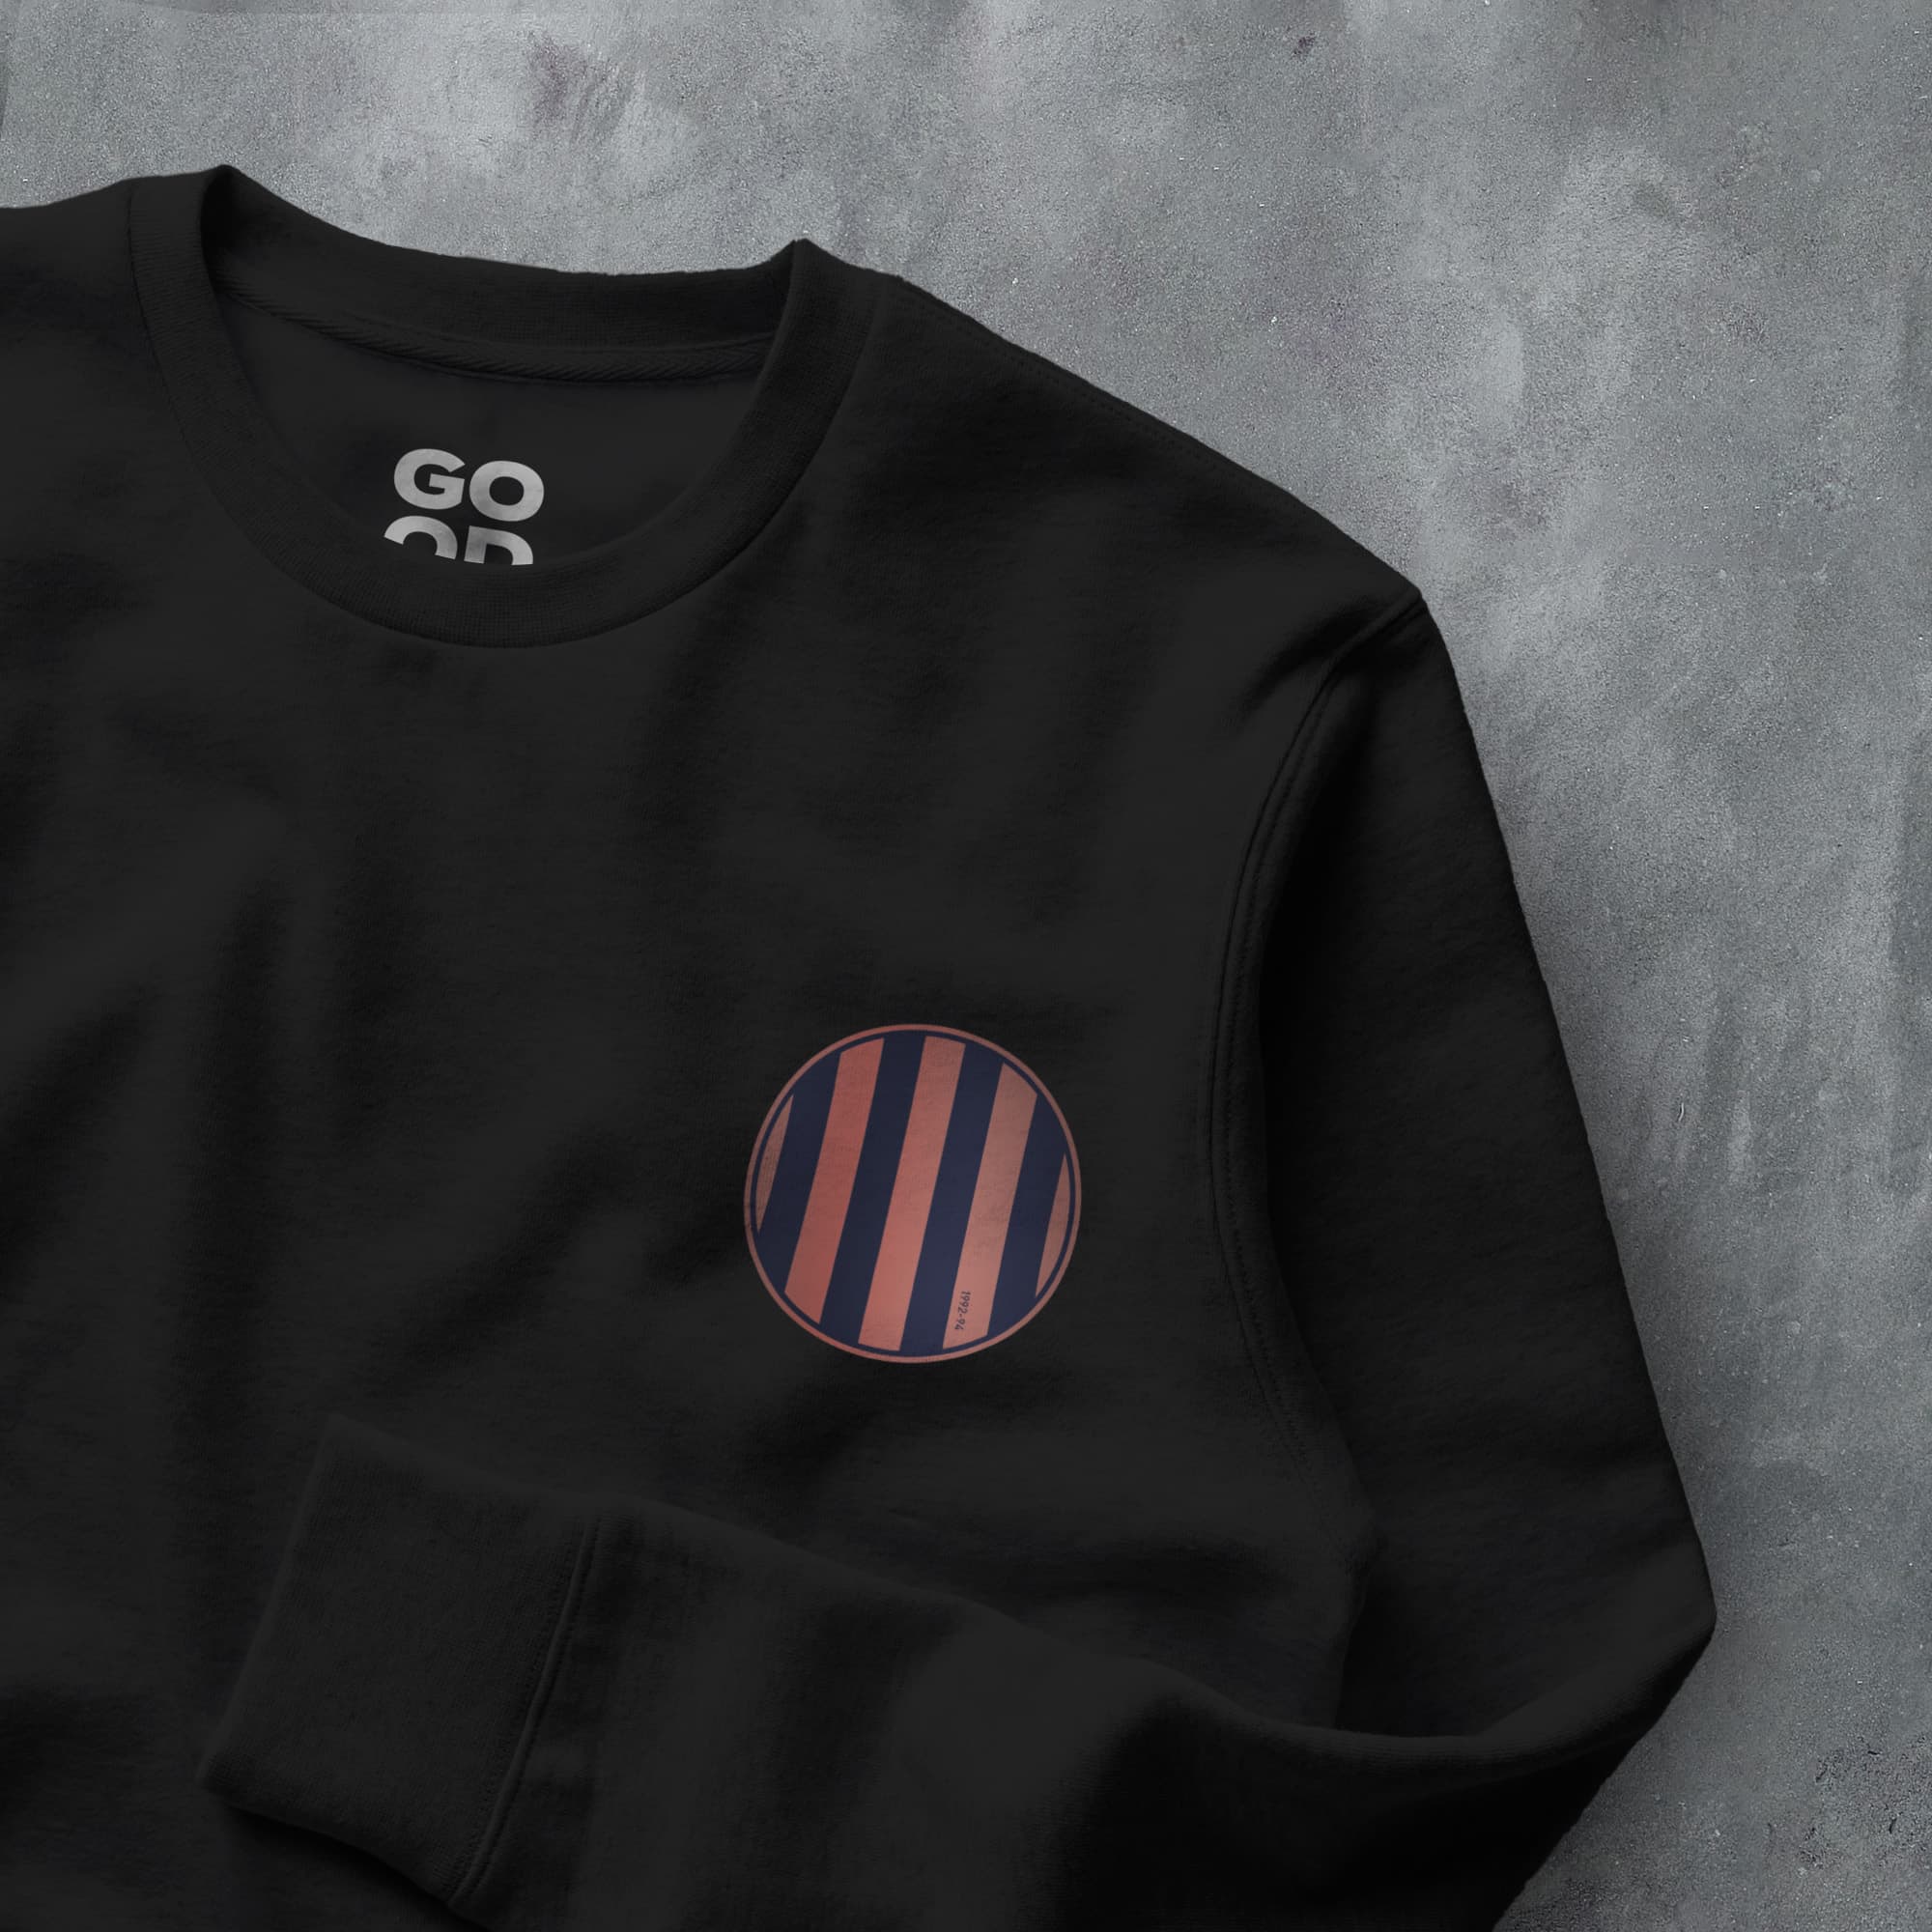 a black sweatshirt with a red and blue striped pocket